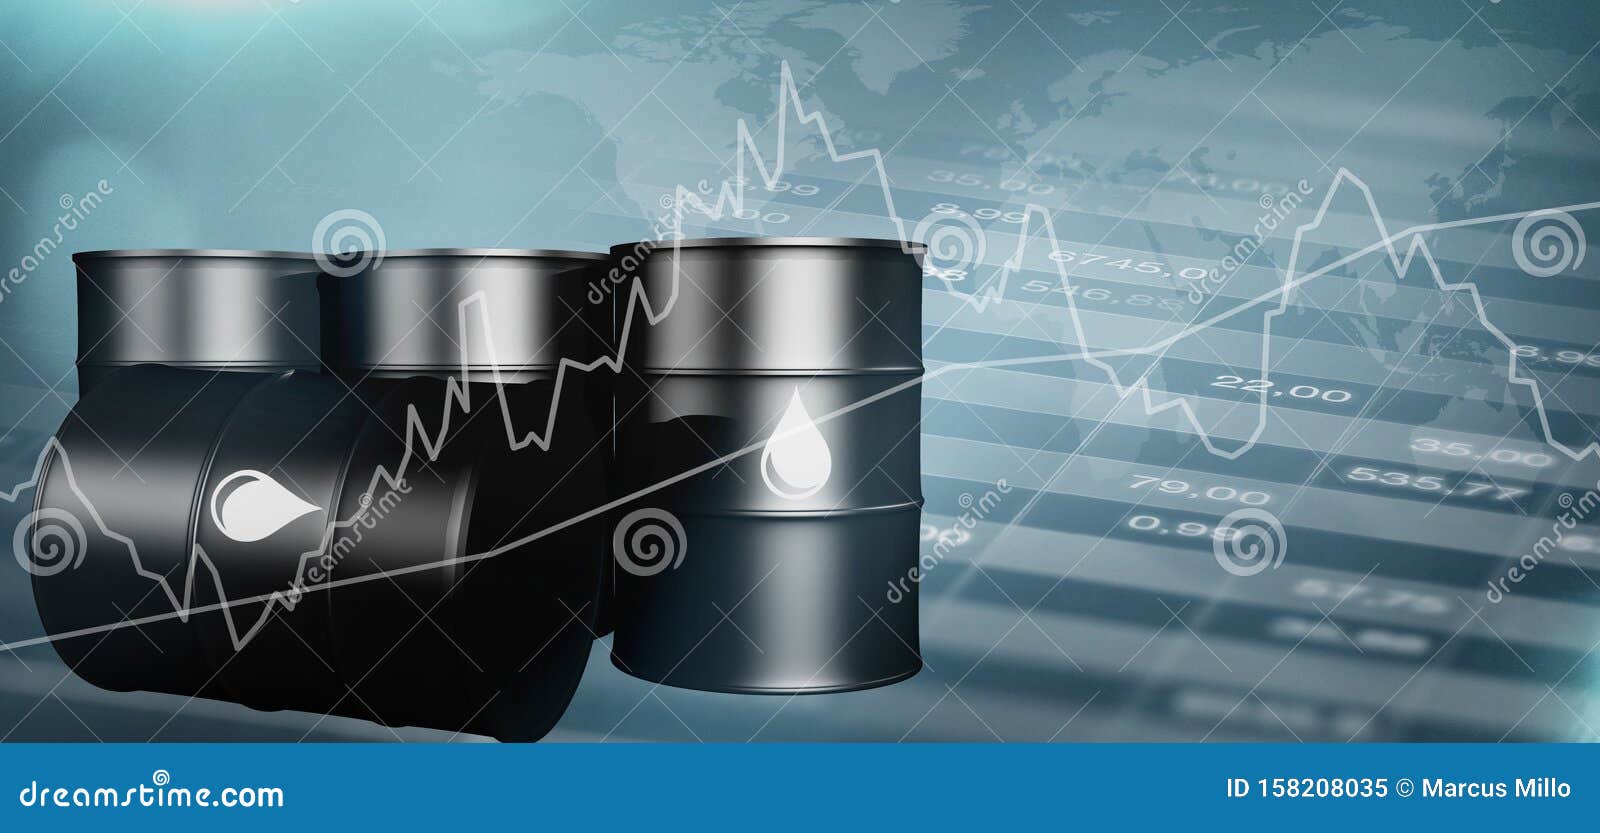 oil prices oil speculation raw materials